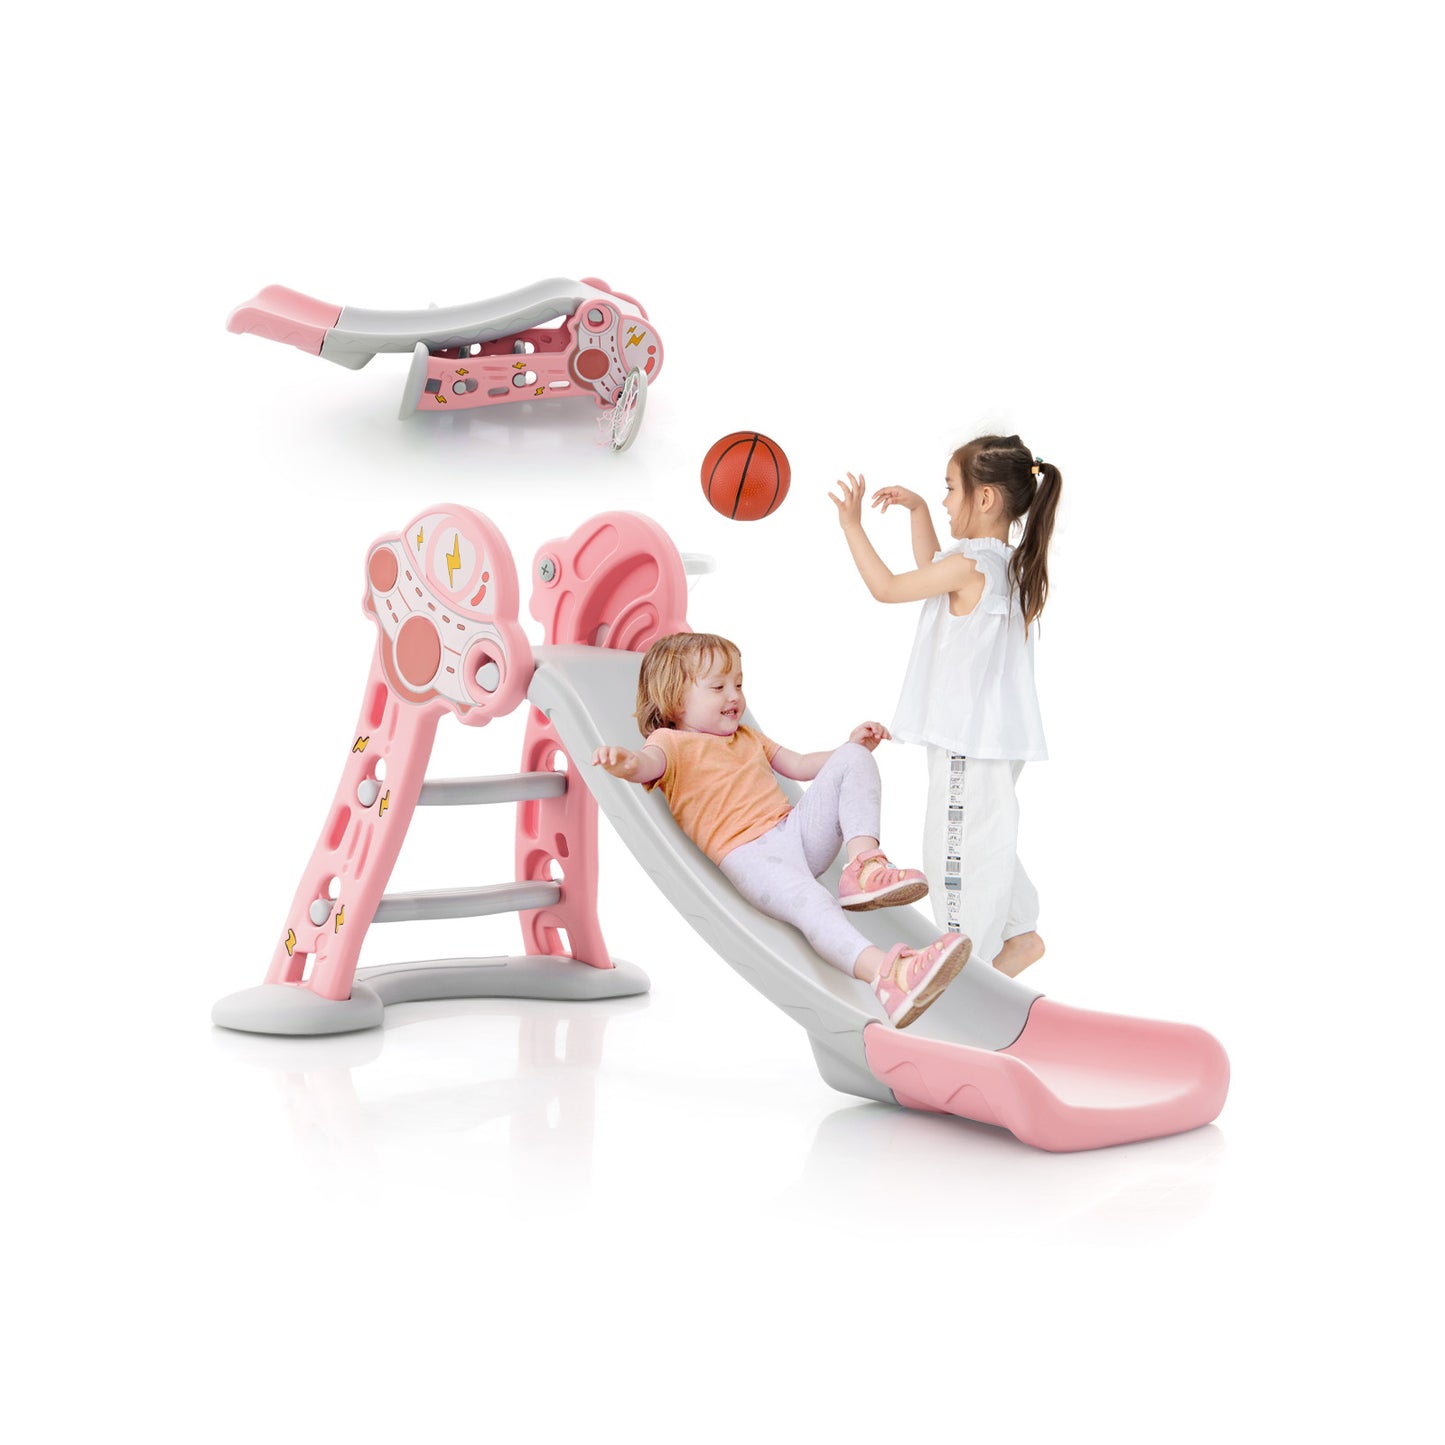 3-in-1 Folding Slide Playset with Basketball Hoop and Small Basketball-Pink